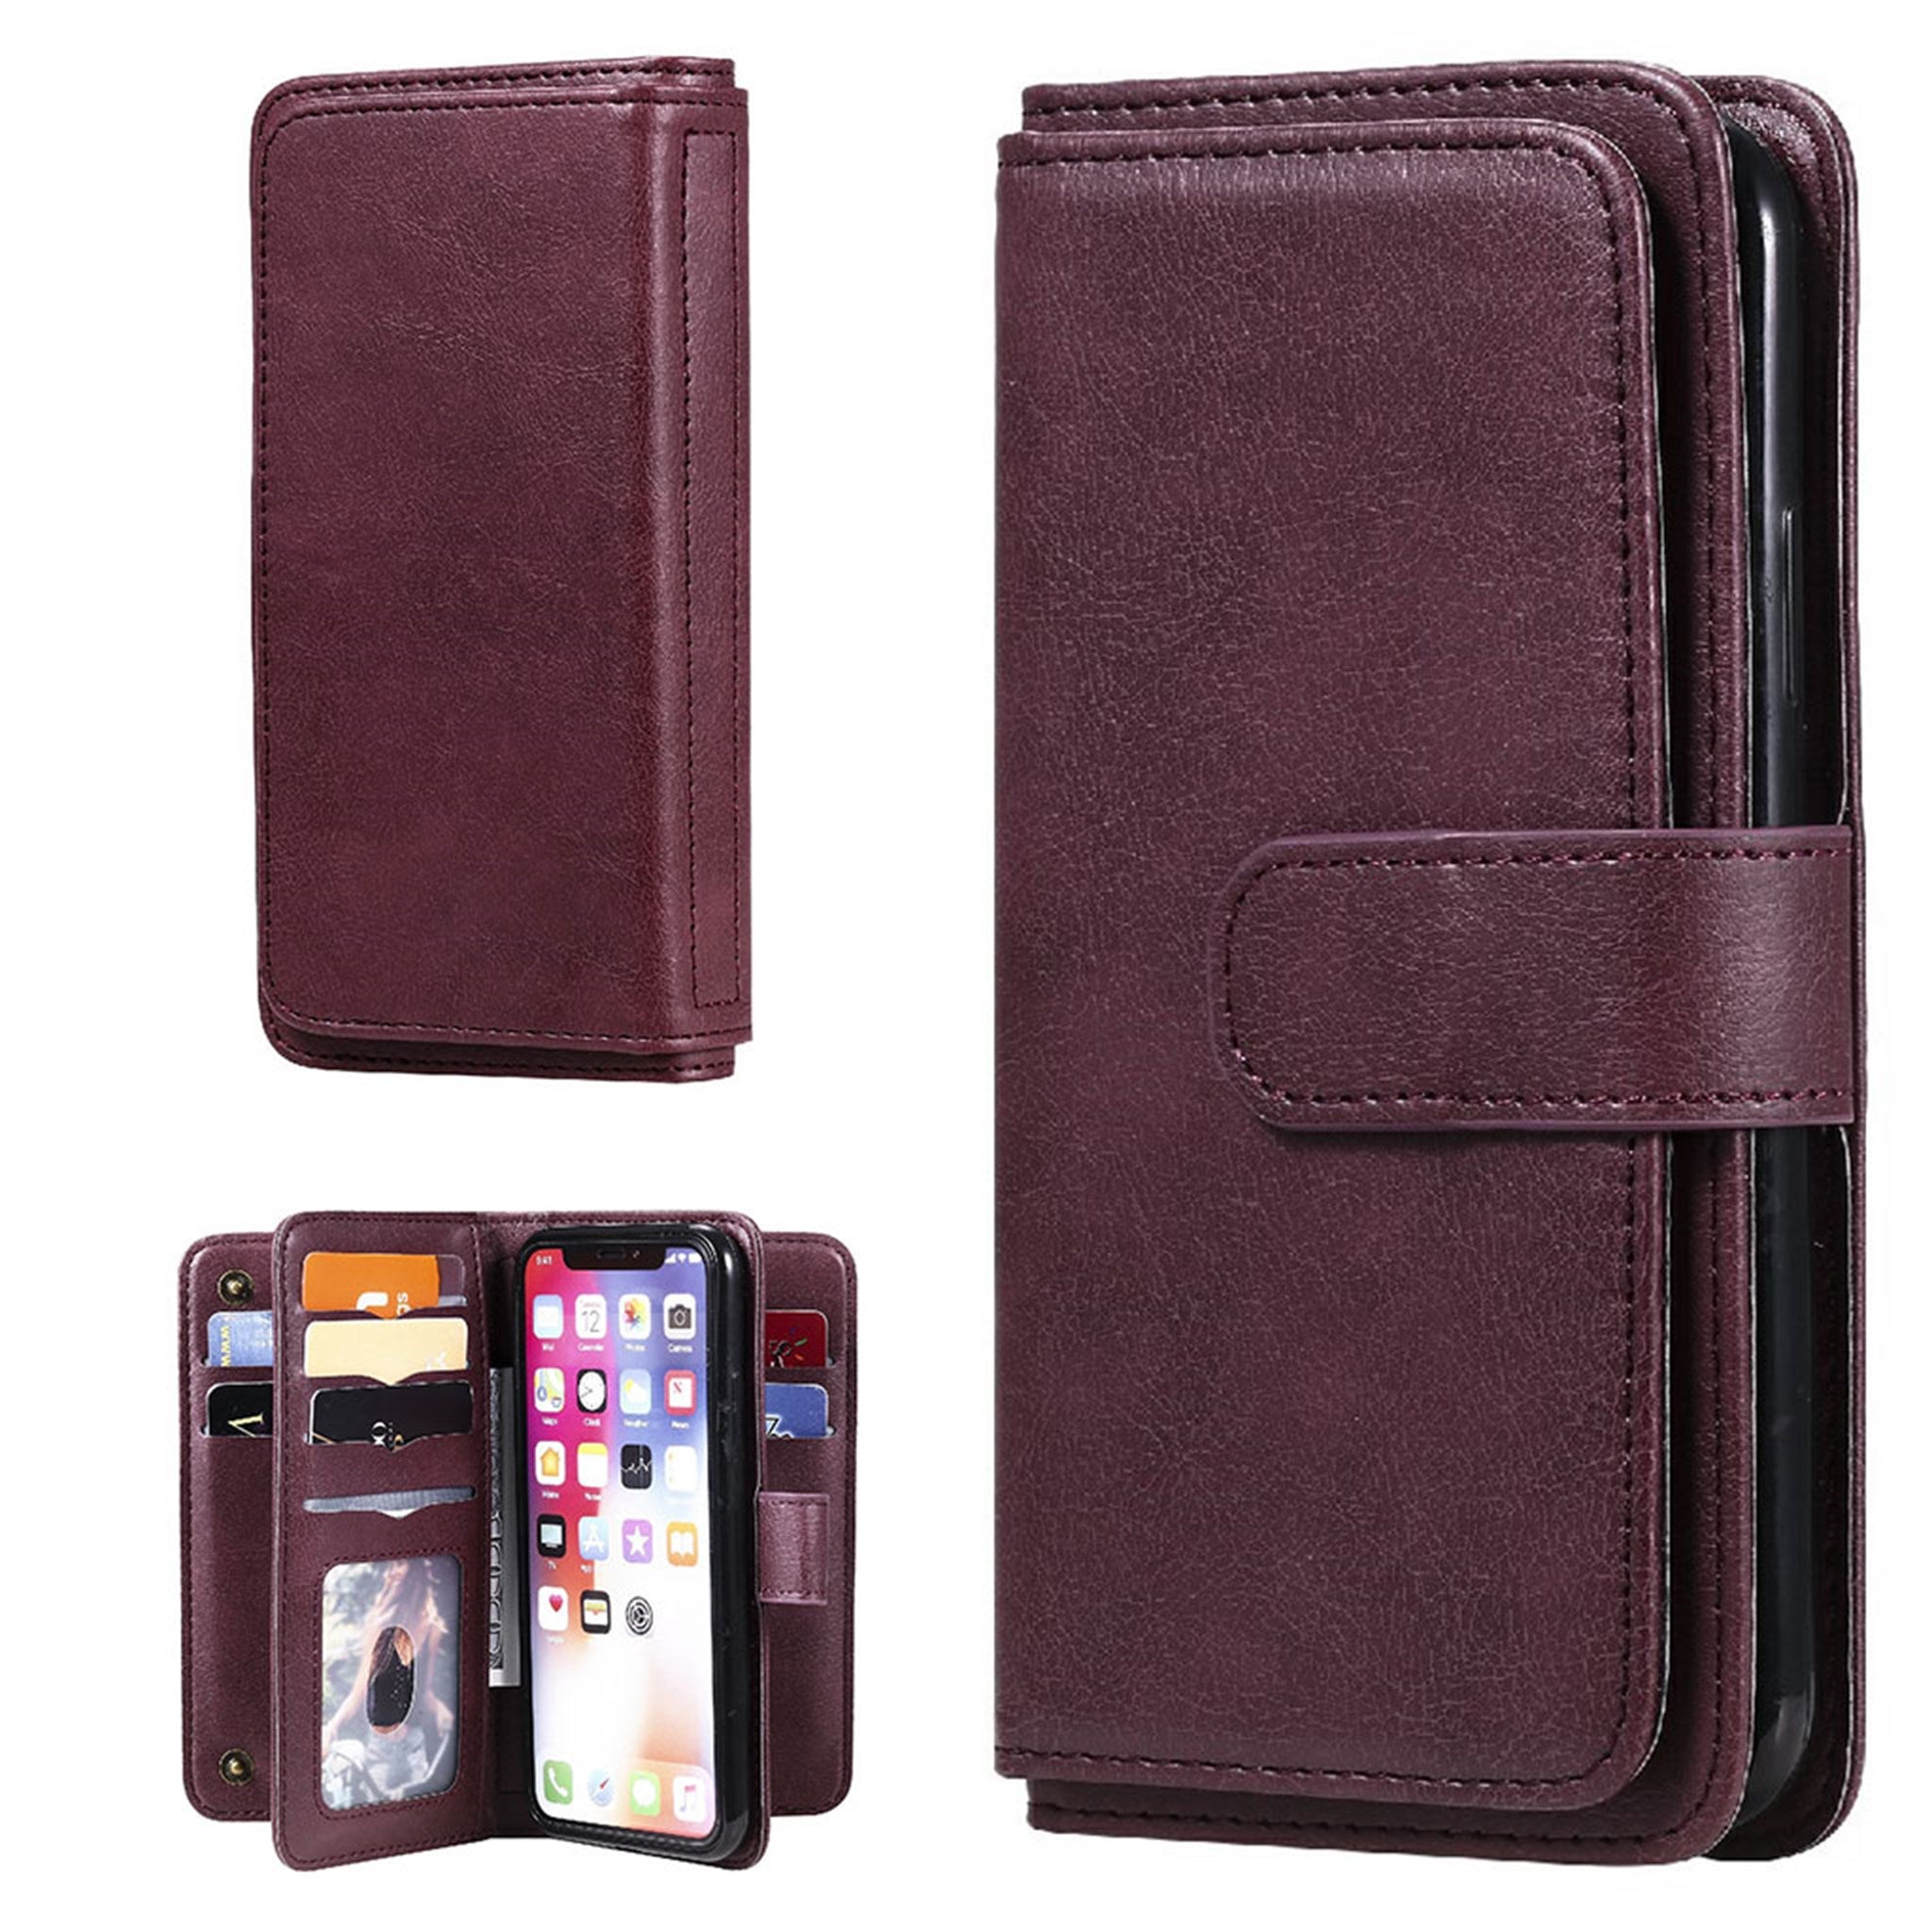 10-slot wallet case for iPhone XS - Wine Red